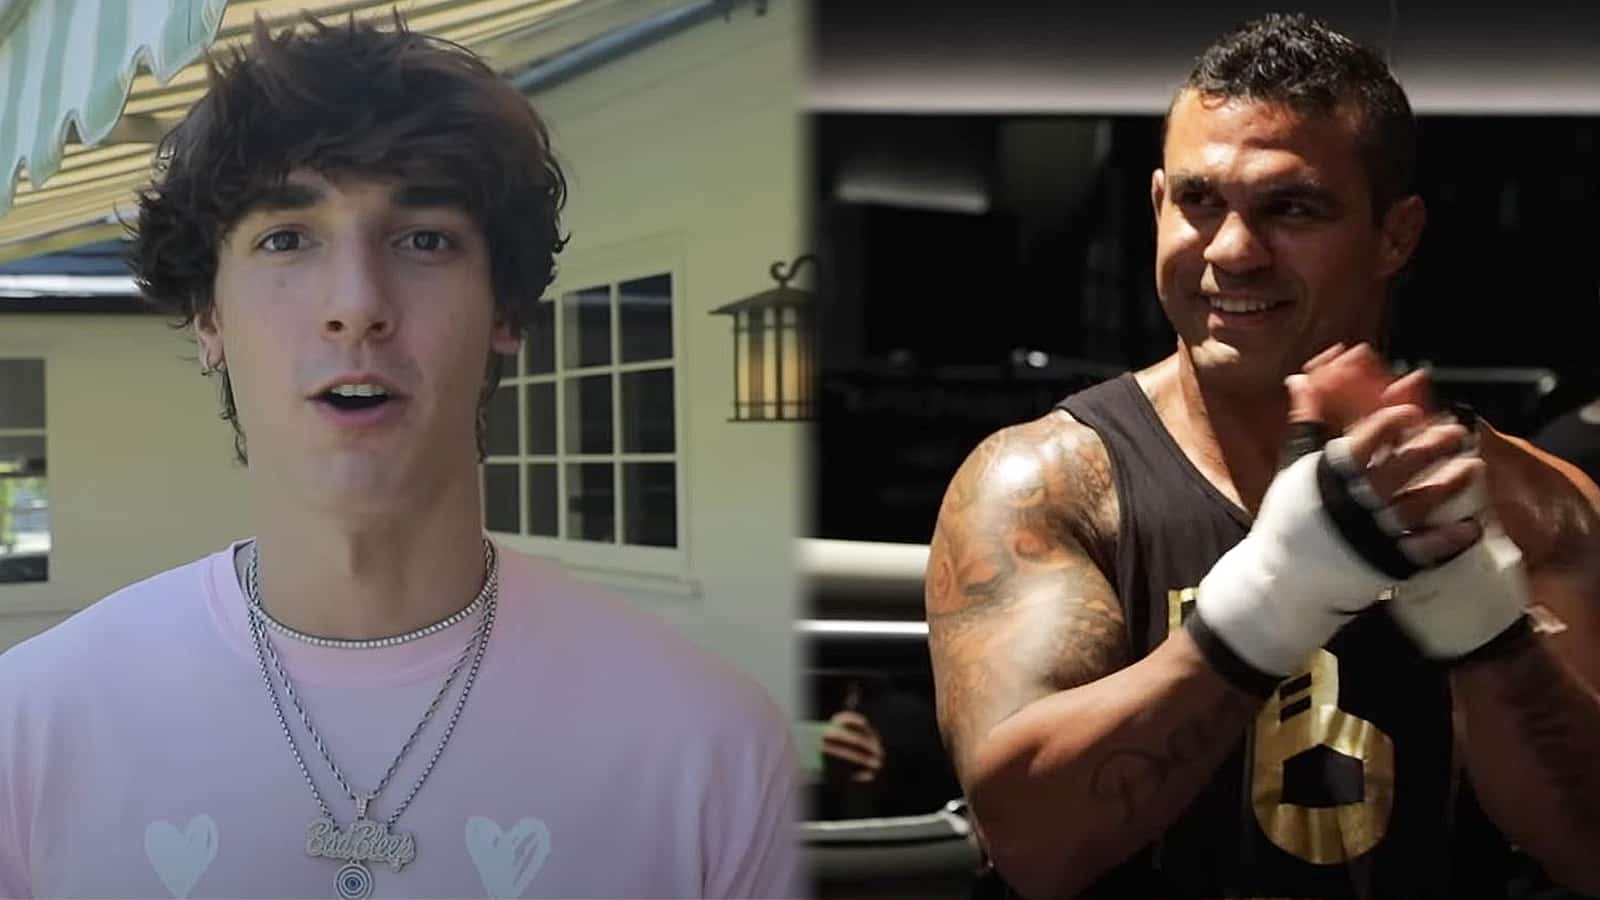 Vitor Belfort offers to train Bryce Hall